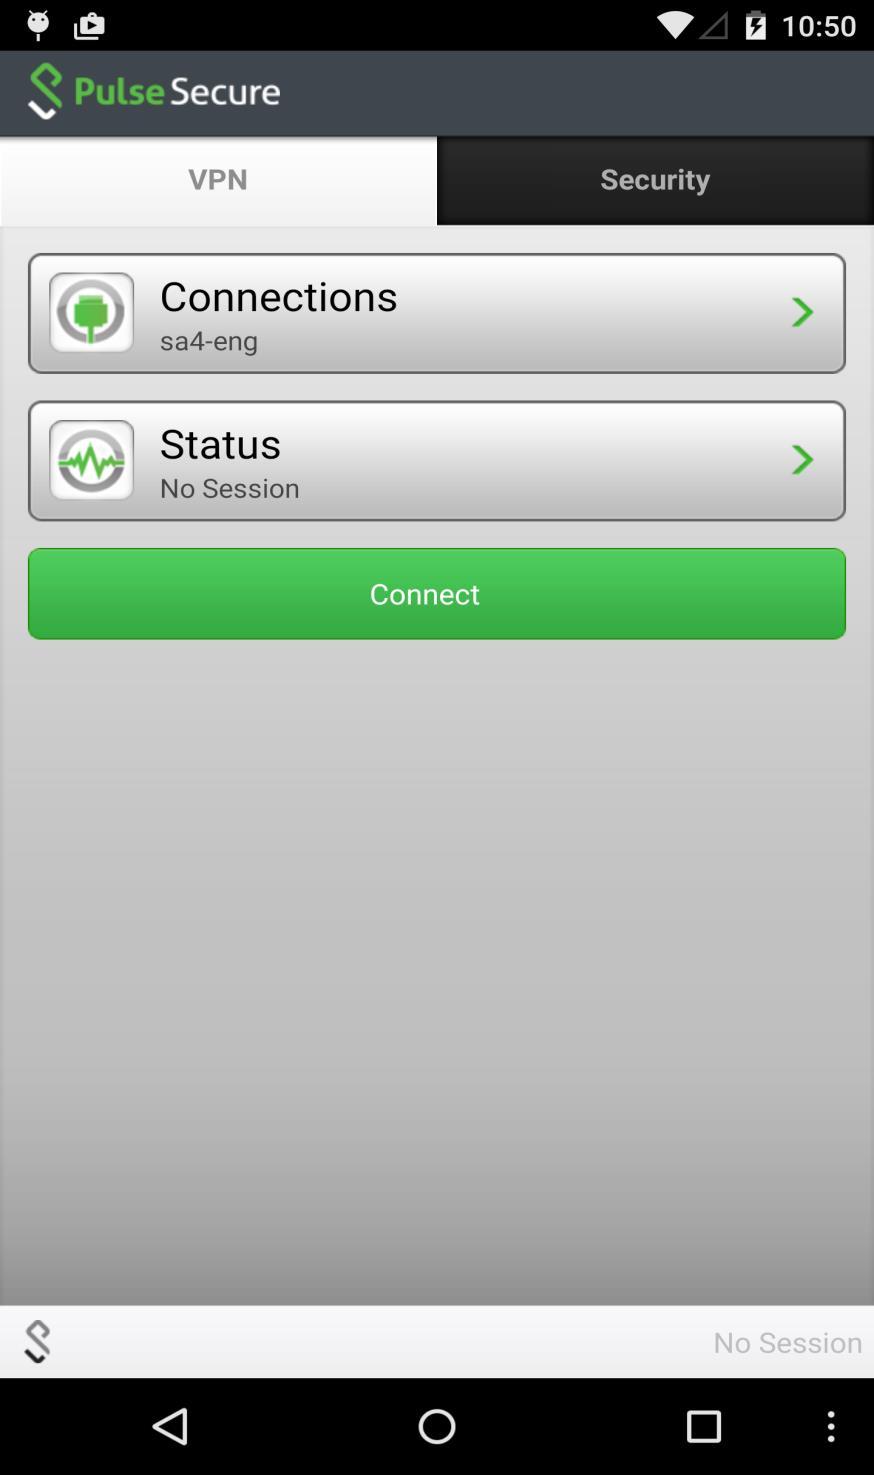 VPN profile. User Interface shows a VPN connection configured in the Connections button and screen. Figure 3 VPN Connections 6.